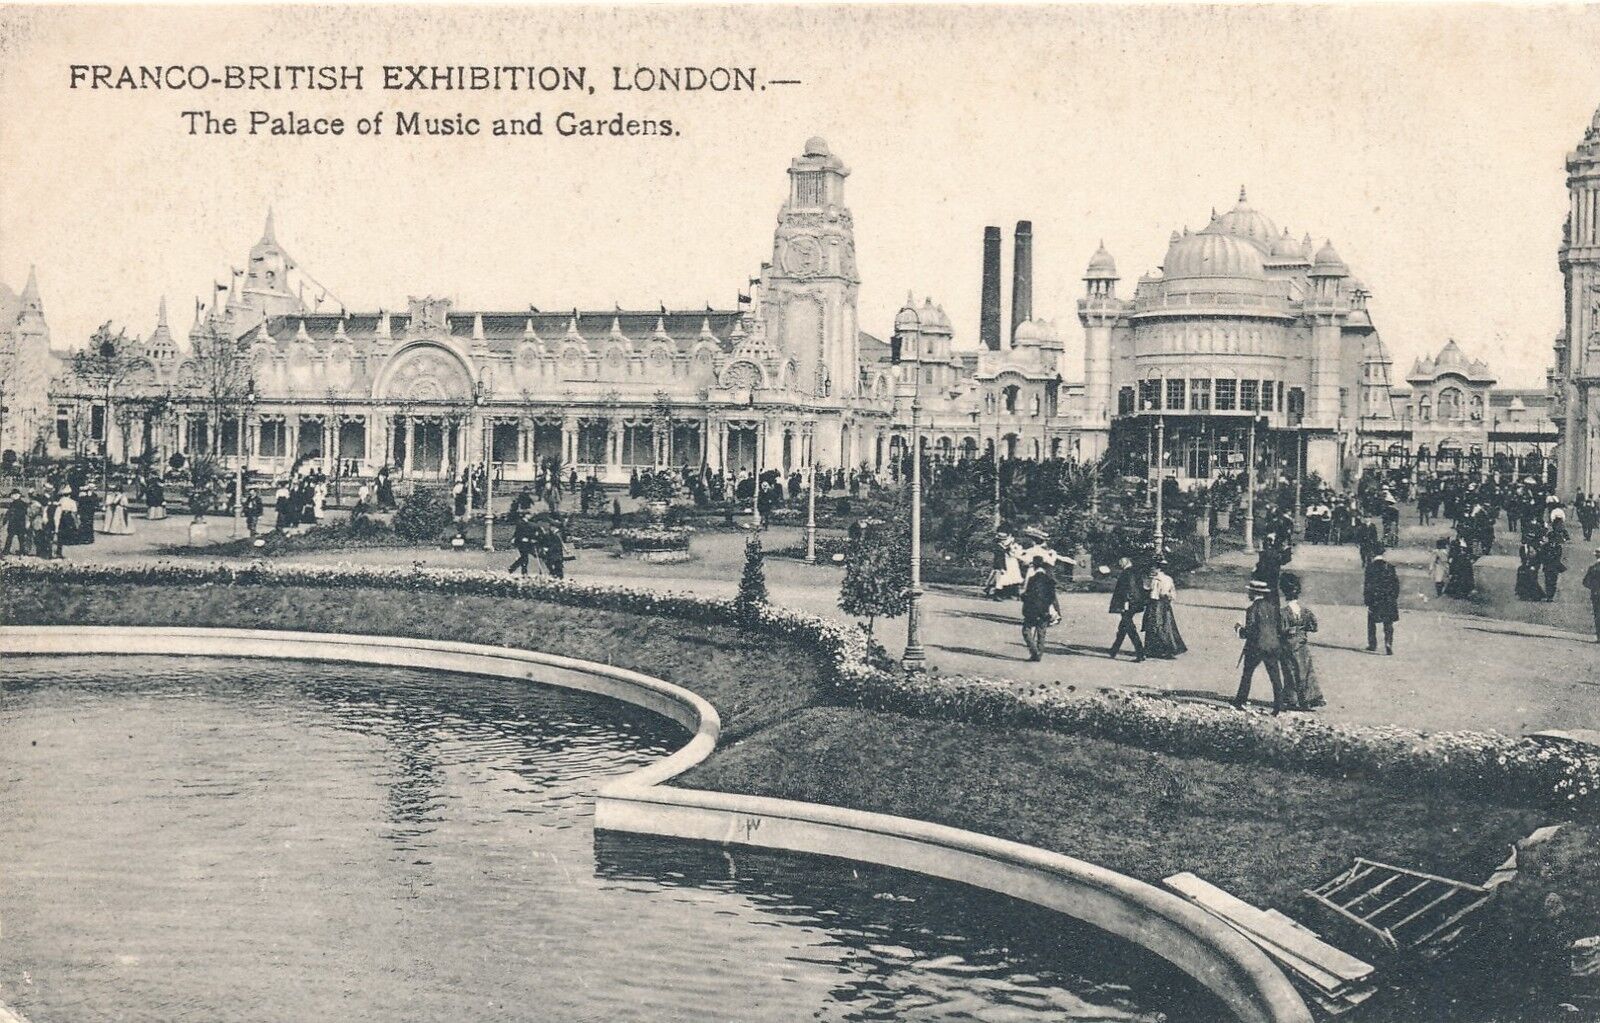 1908 London Franco-British Exhibition The Palace of Music and Gardens